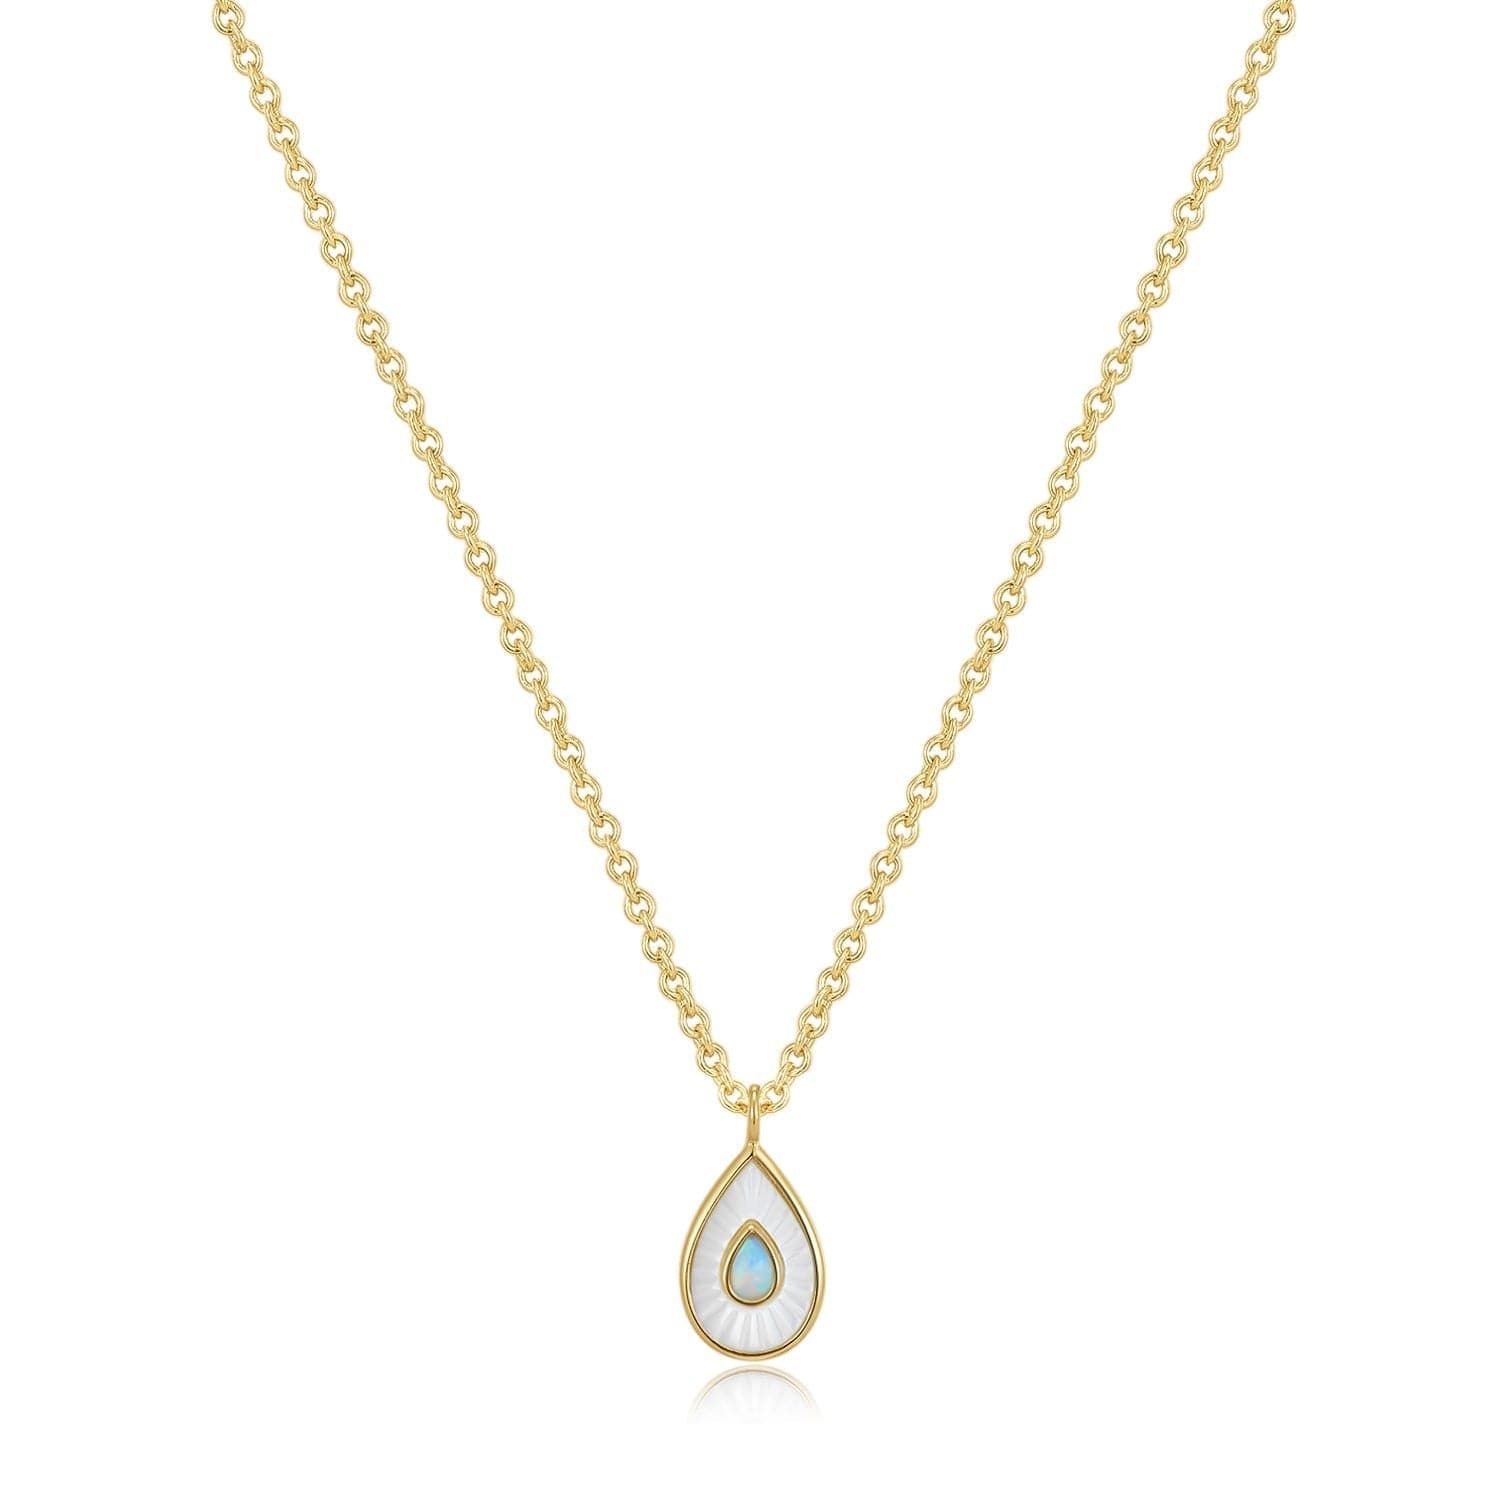 a gold necklace with a tear shaped pendant